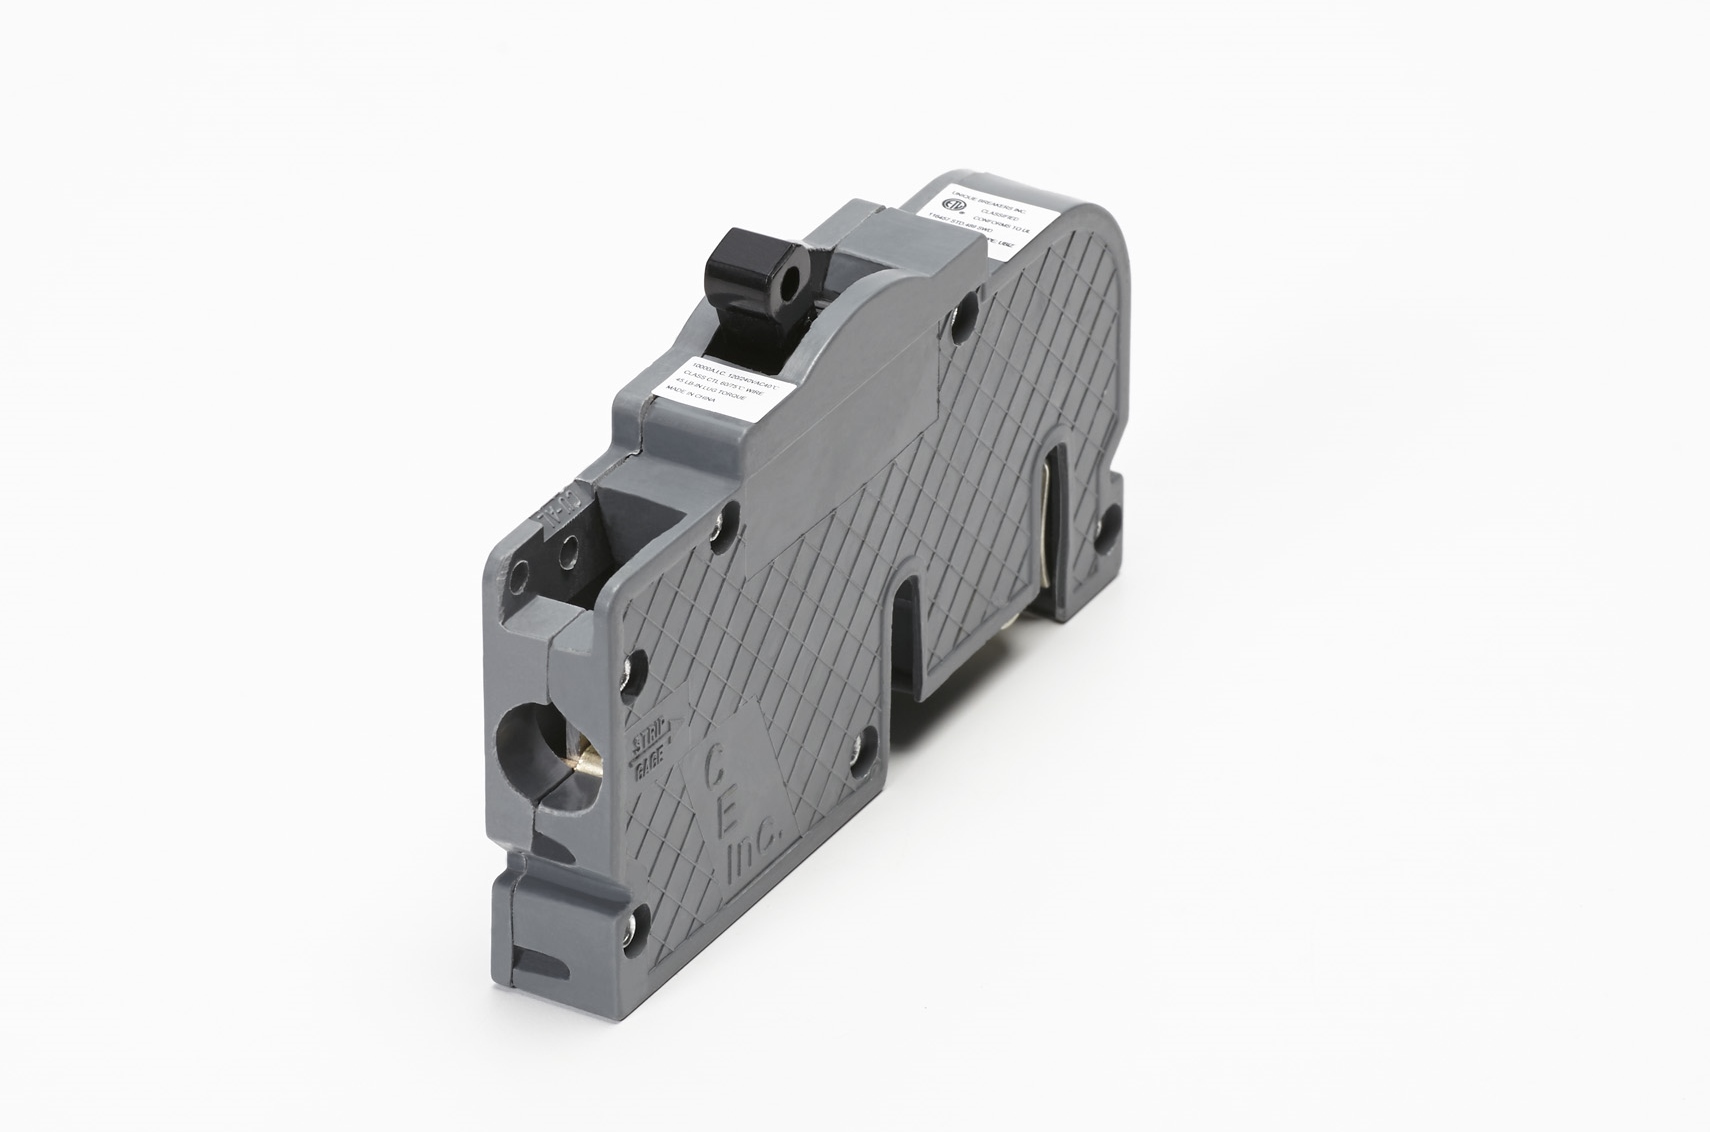 NEW Zinsco replacement circuit breaker by Connecticut Electric Type UBIZ. For use in Zinsco load centers that accept type Q circuit breakers. ETL Listed. 10,000 AIC 1-pole 50A